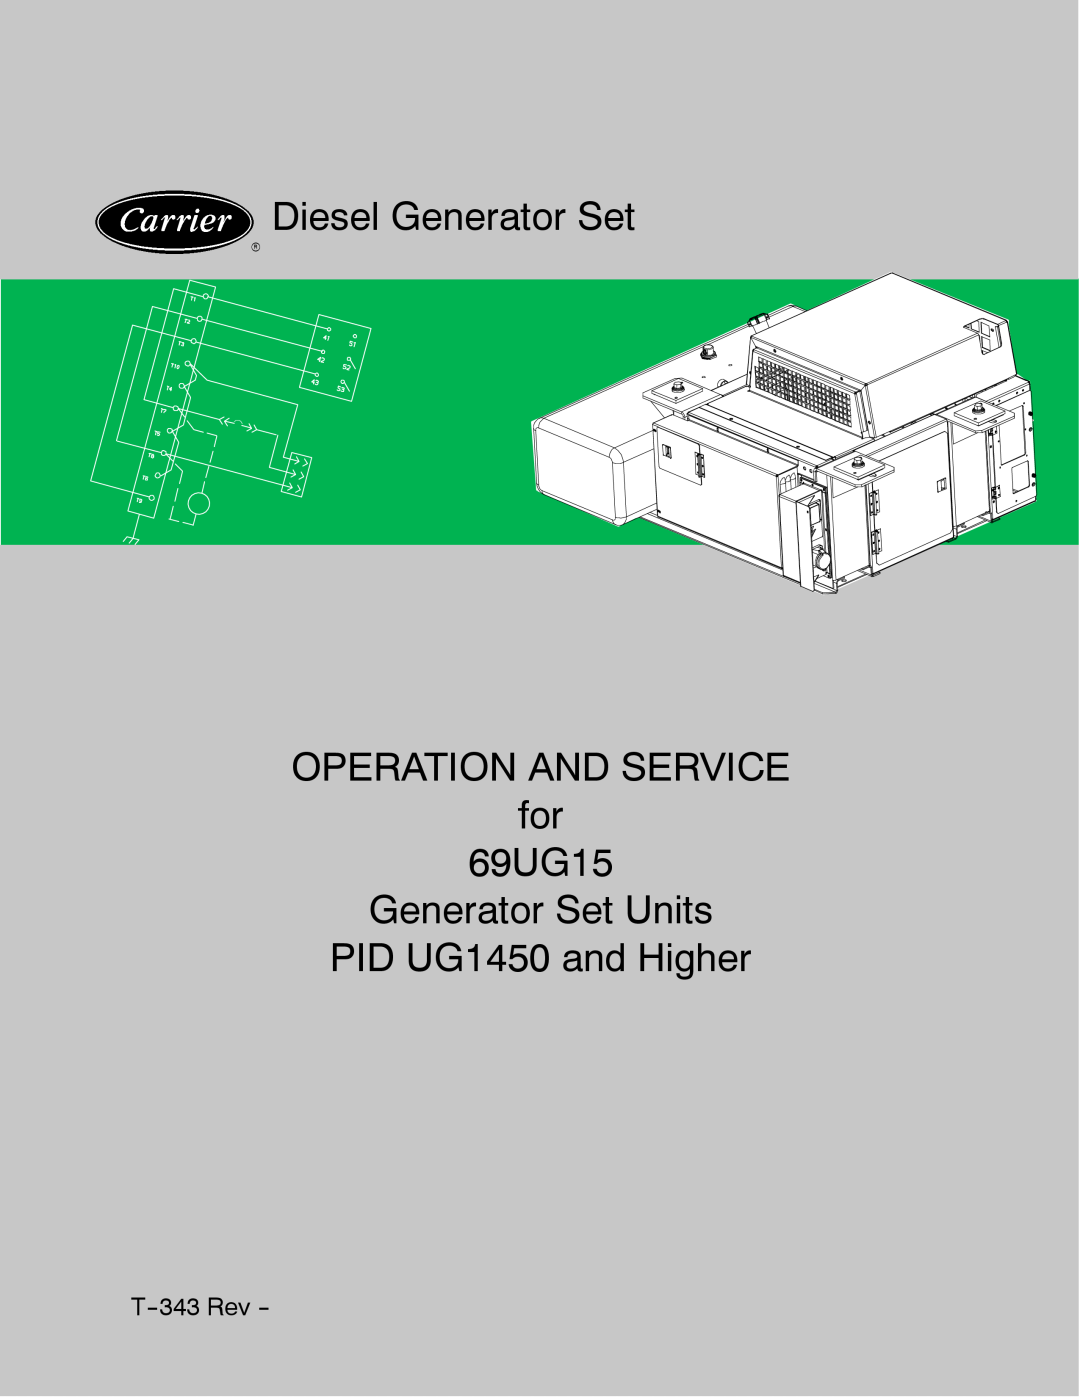 Carrier manual Diesel Generator Set, OPERATION AND SERVICE for 69UG15 Generator Set Units, PID UG1450 and Higher 